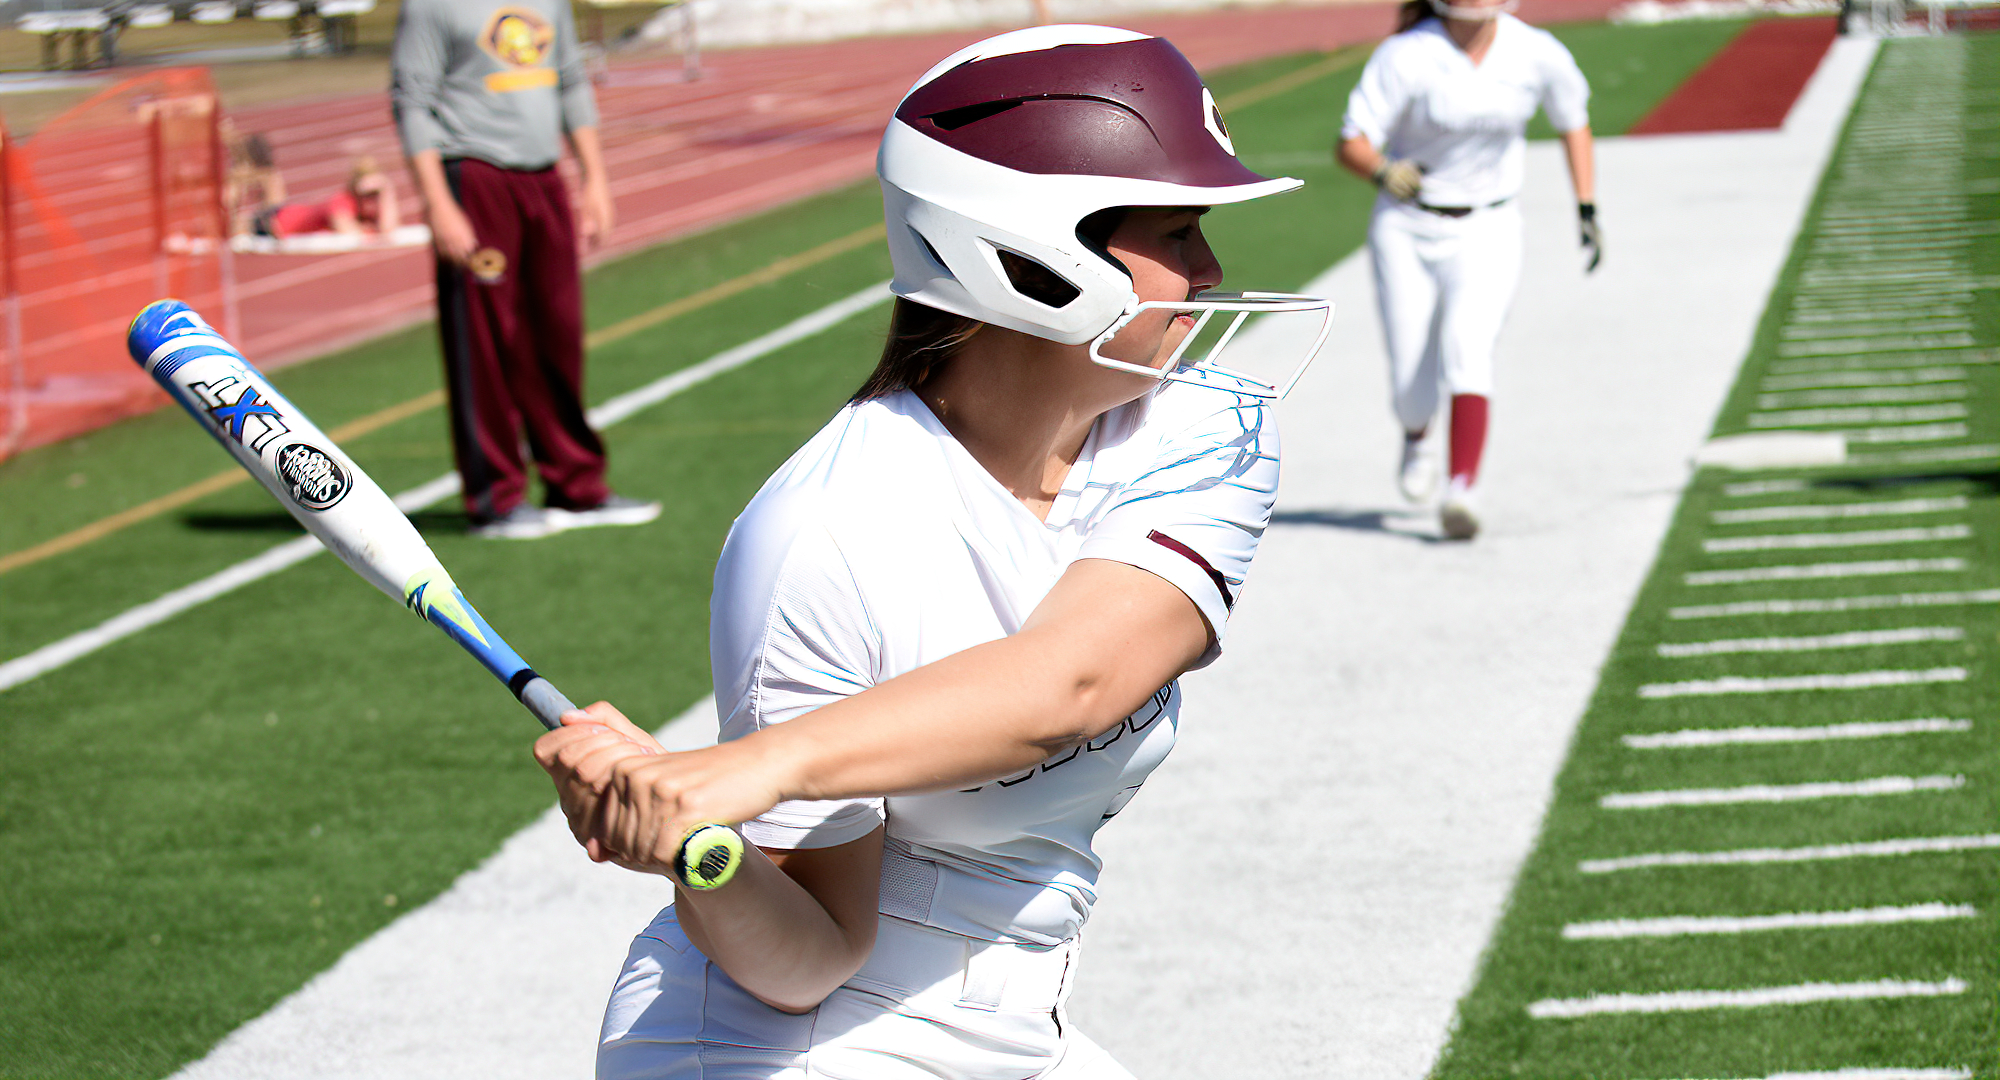 Junior Kate Wensloff was 4-for-4 with a double and a triple in the Cobbers' 7-1 win over Finlandia.